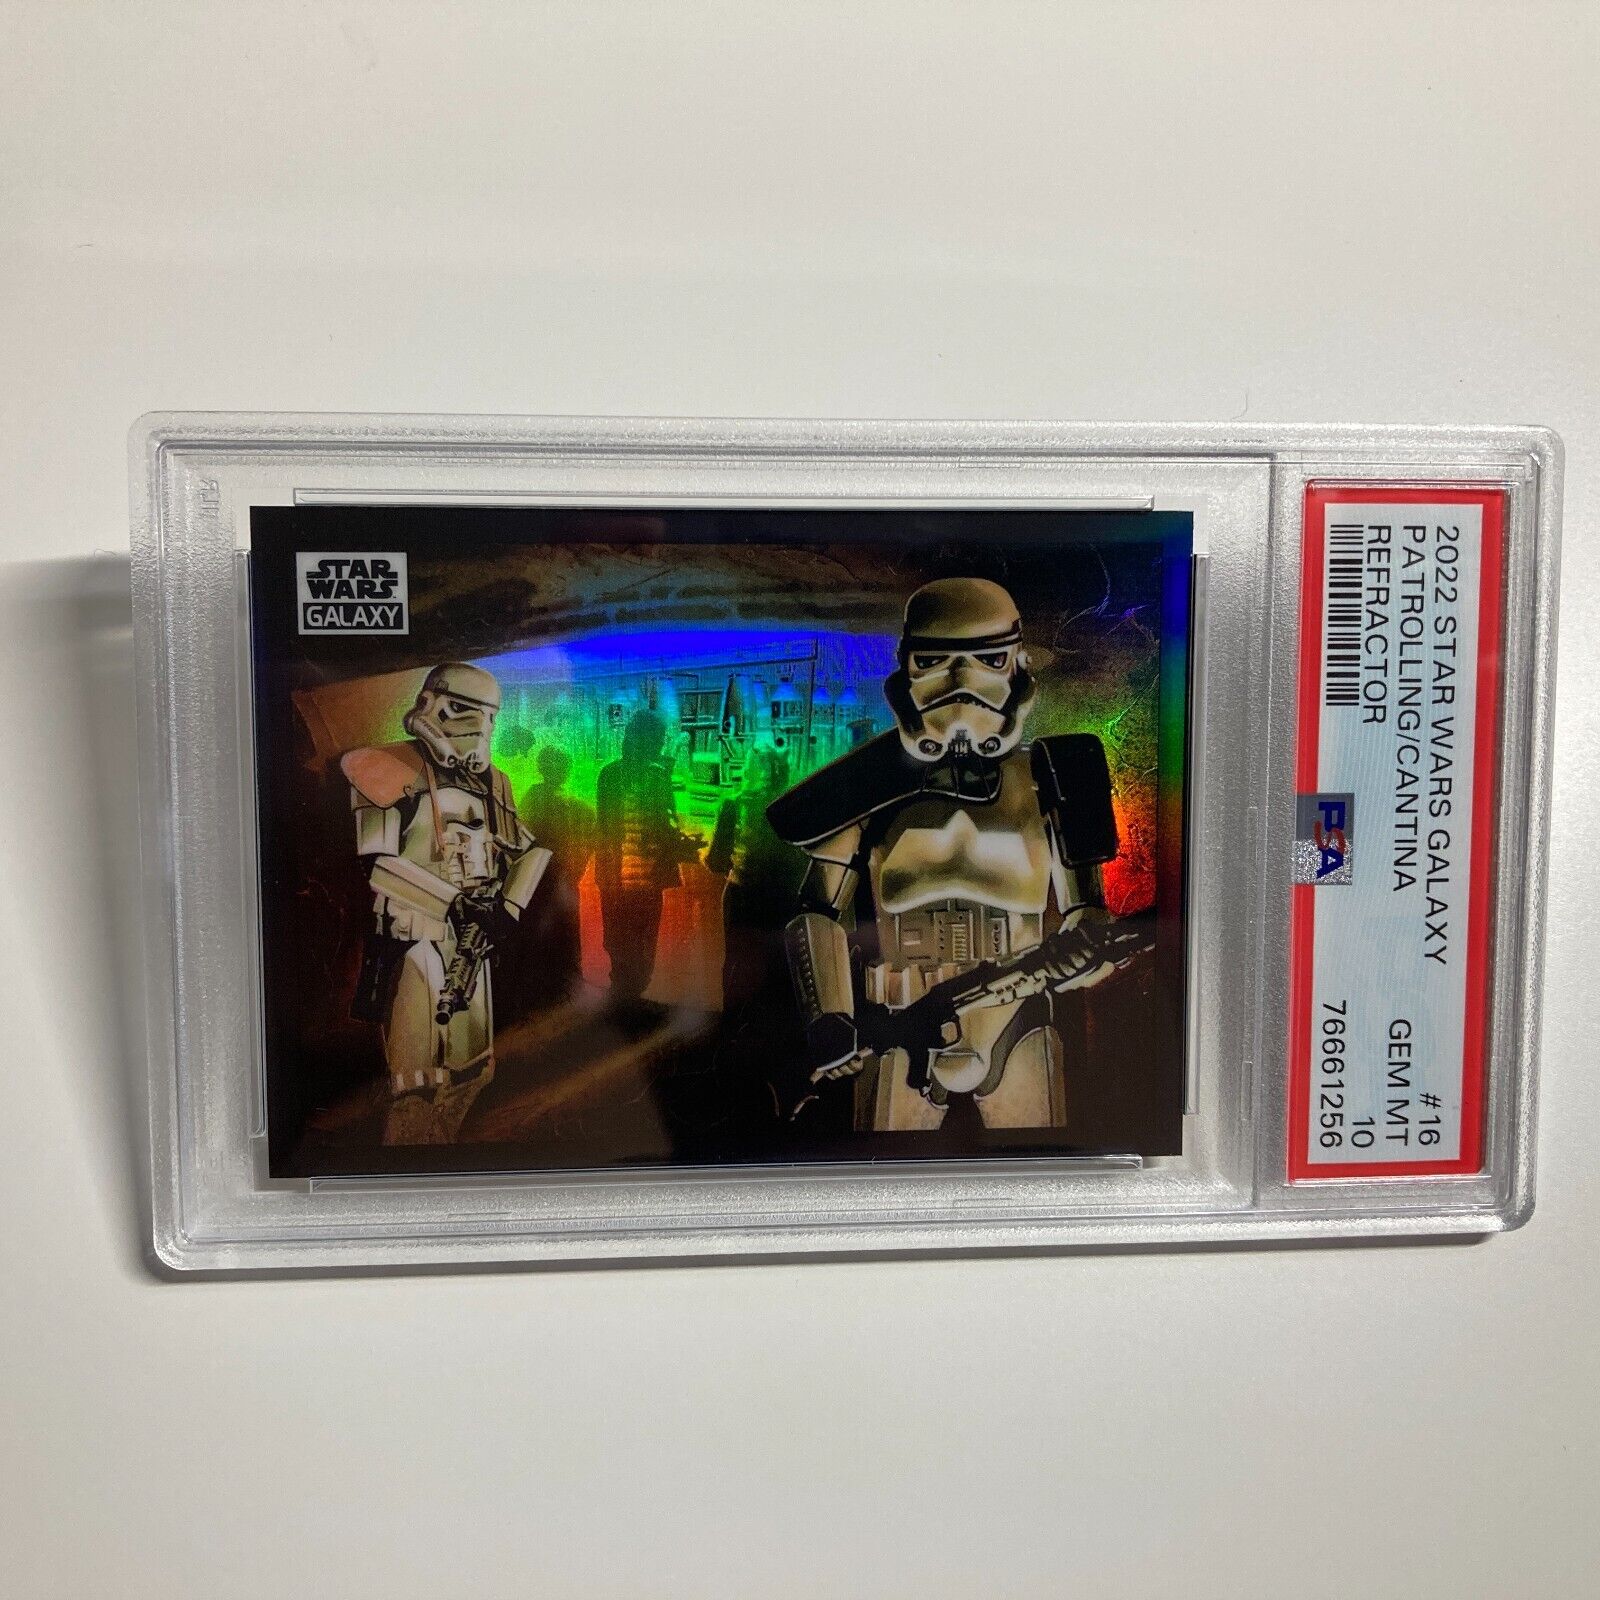 Stormtroopers 2022 Topps Chrome Star Wars Galaxy Refractor Card #16 PSA 10